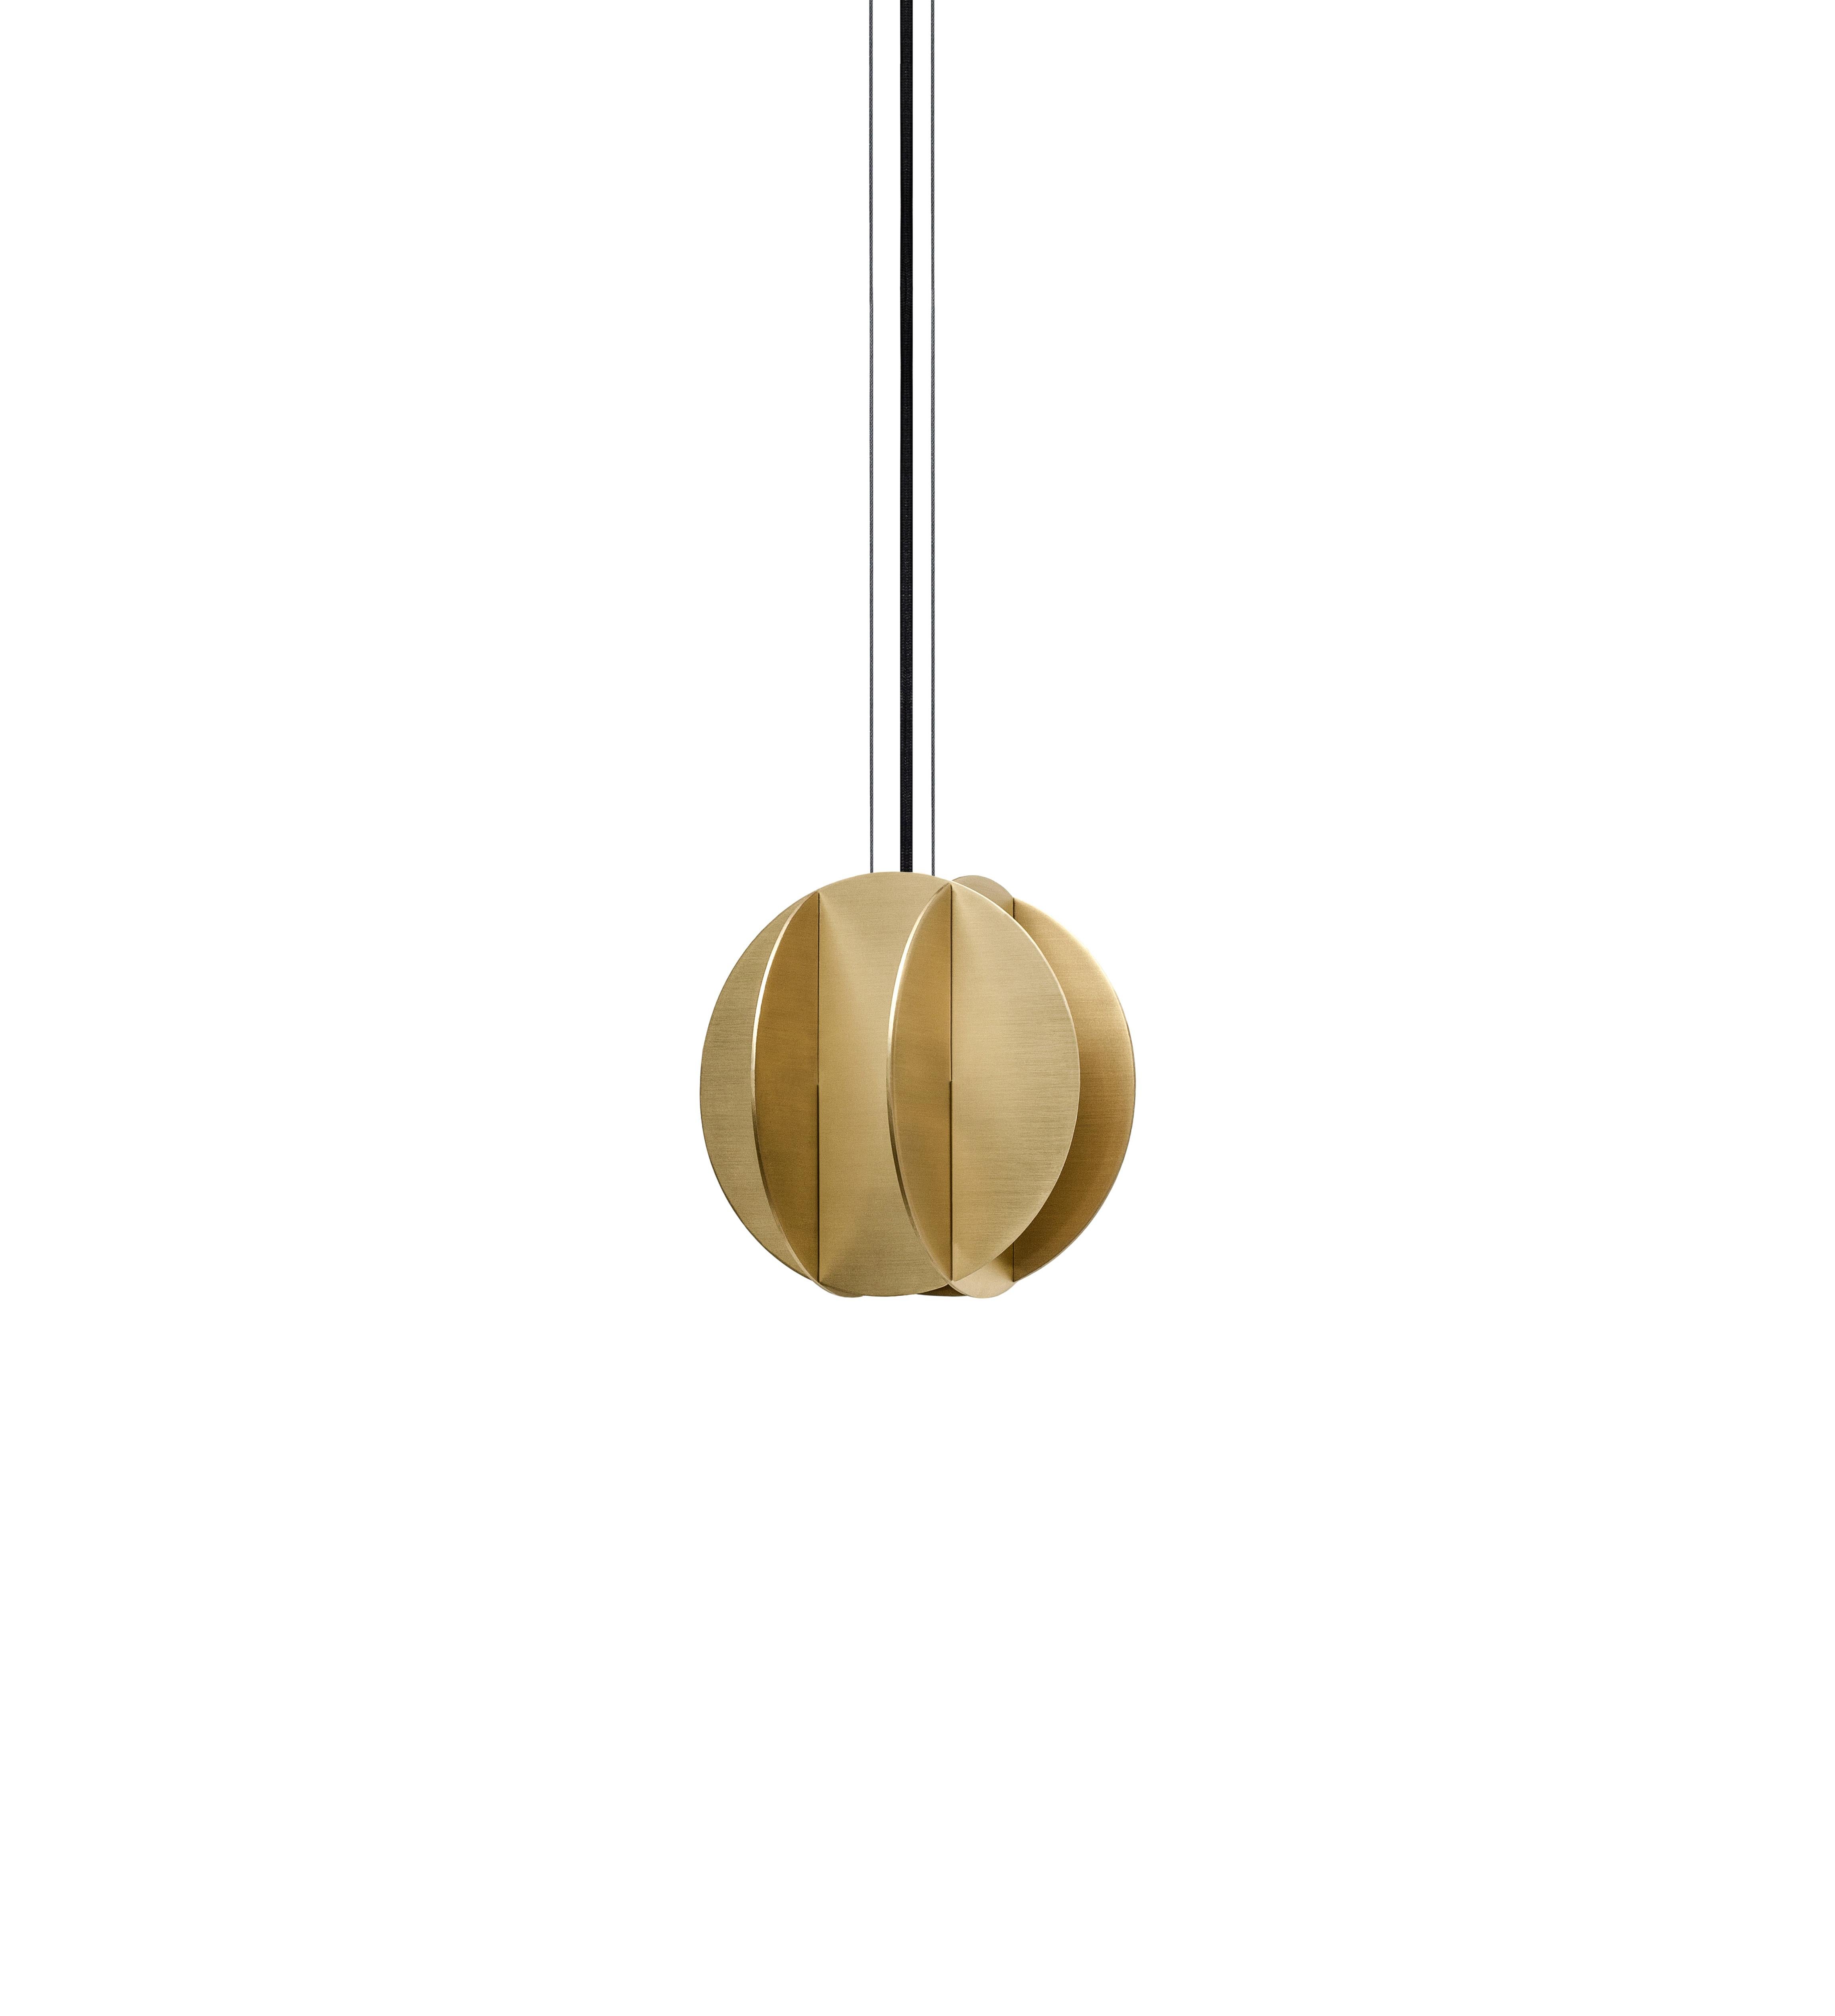 Brushed Set of Three Contemporary Pendant Lamps El Lamps Small CS1 by NOOM in Brass